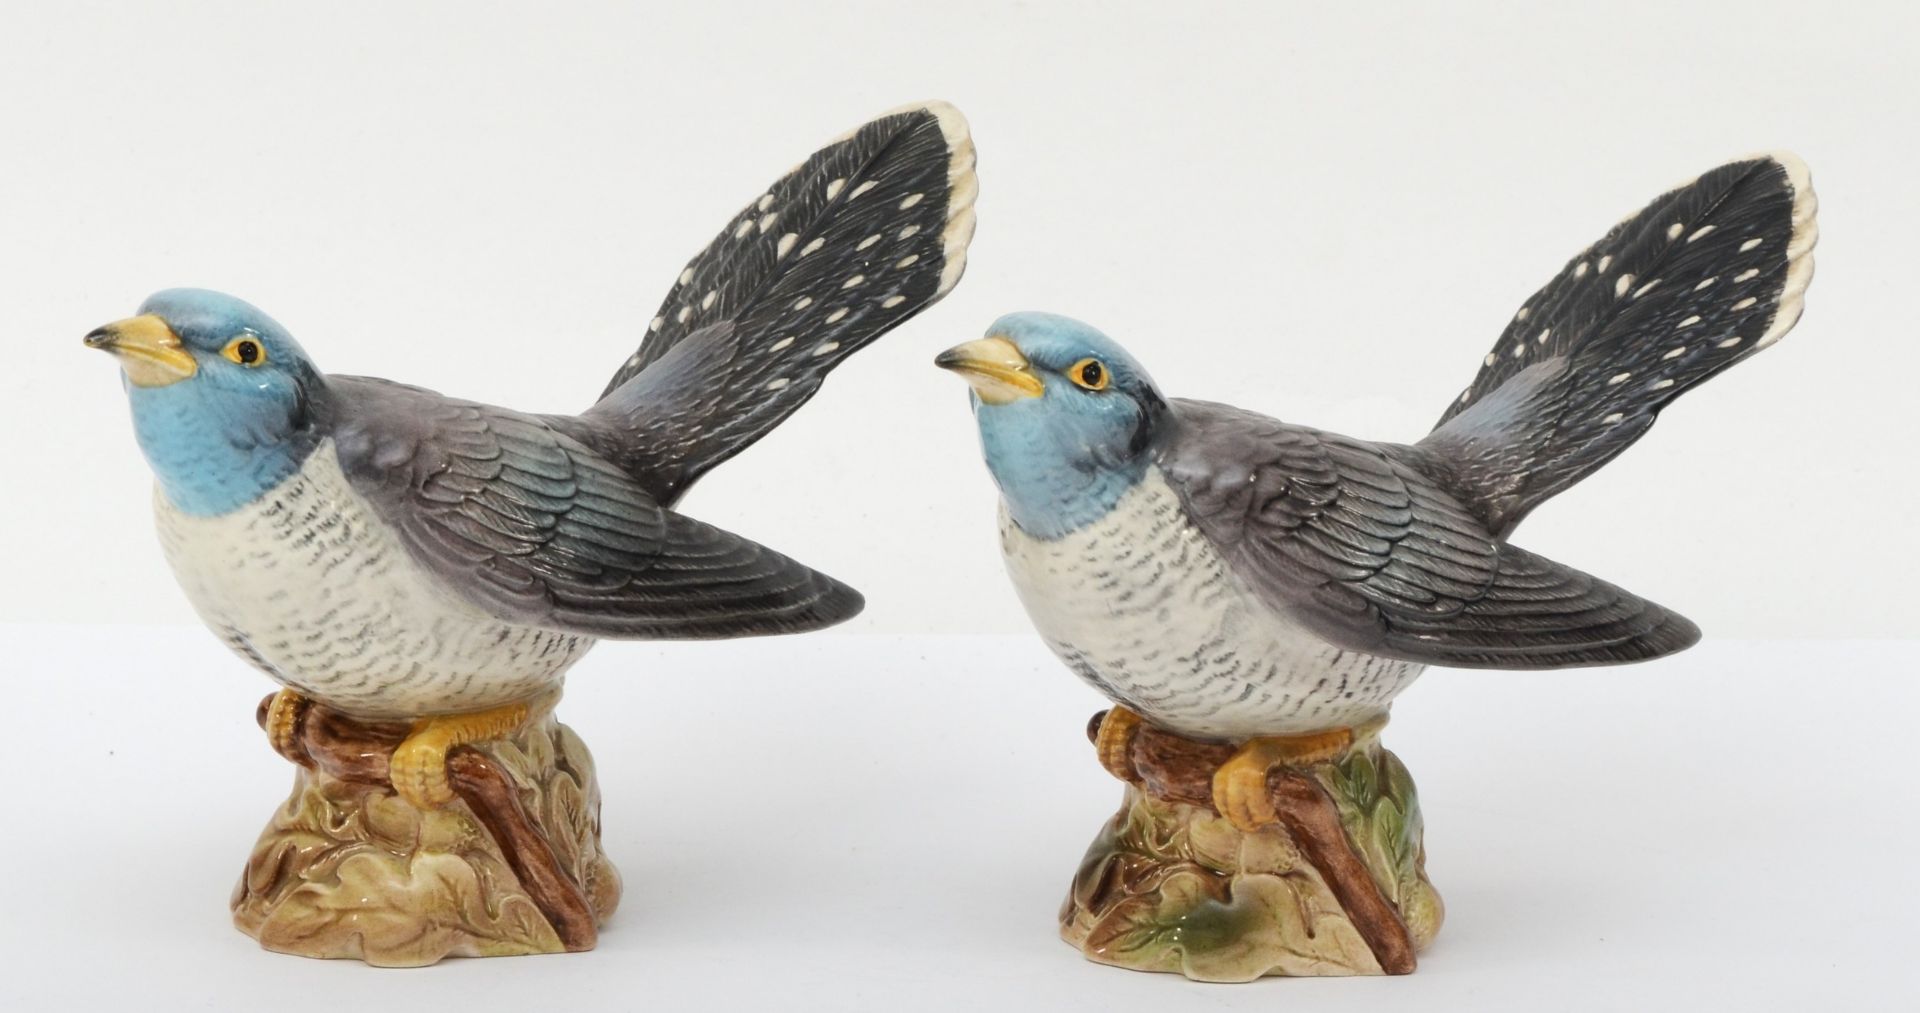 A pair of Beswick Cuckoos, model number 2315, designed by Albert Hallam, issued 1970 - 1982, 12 cms